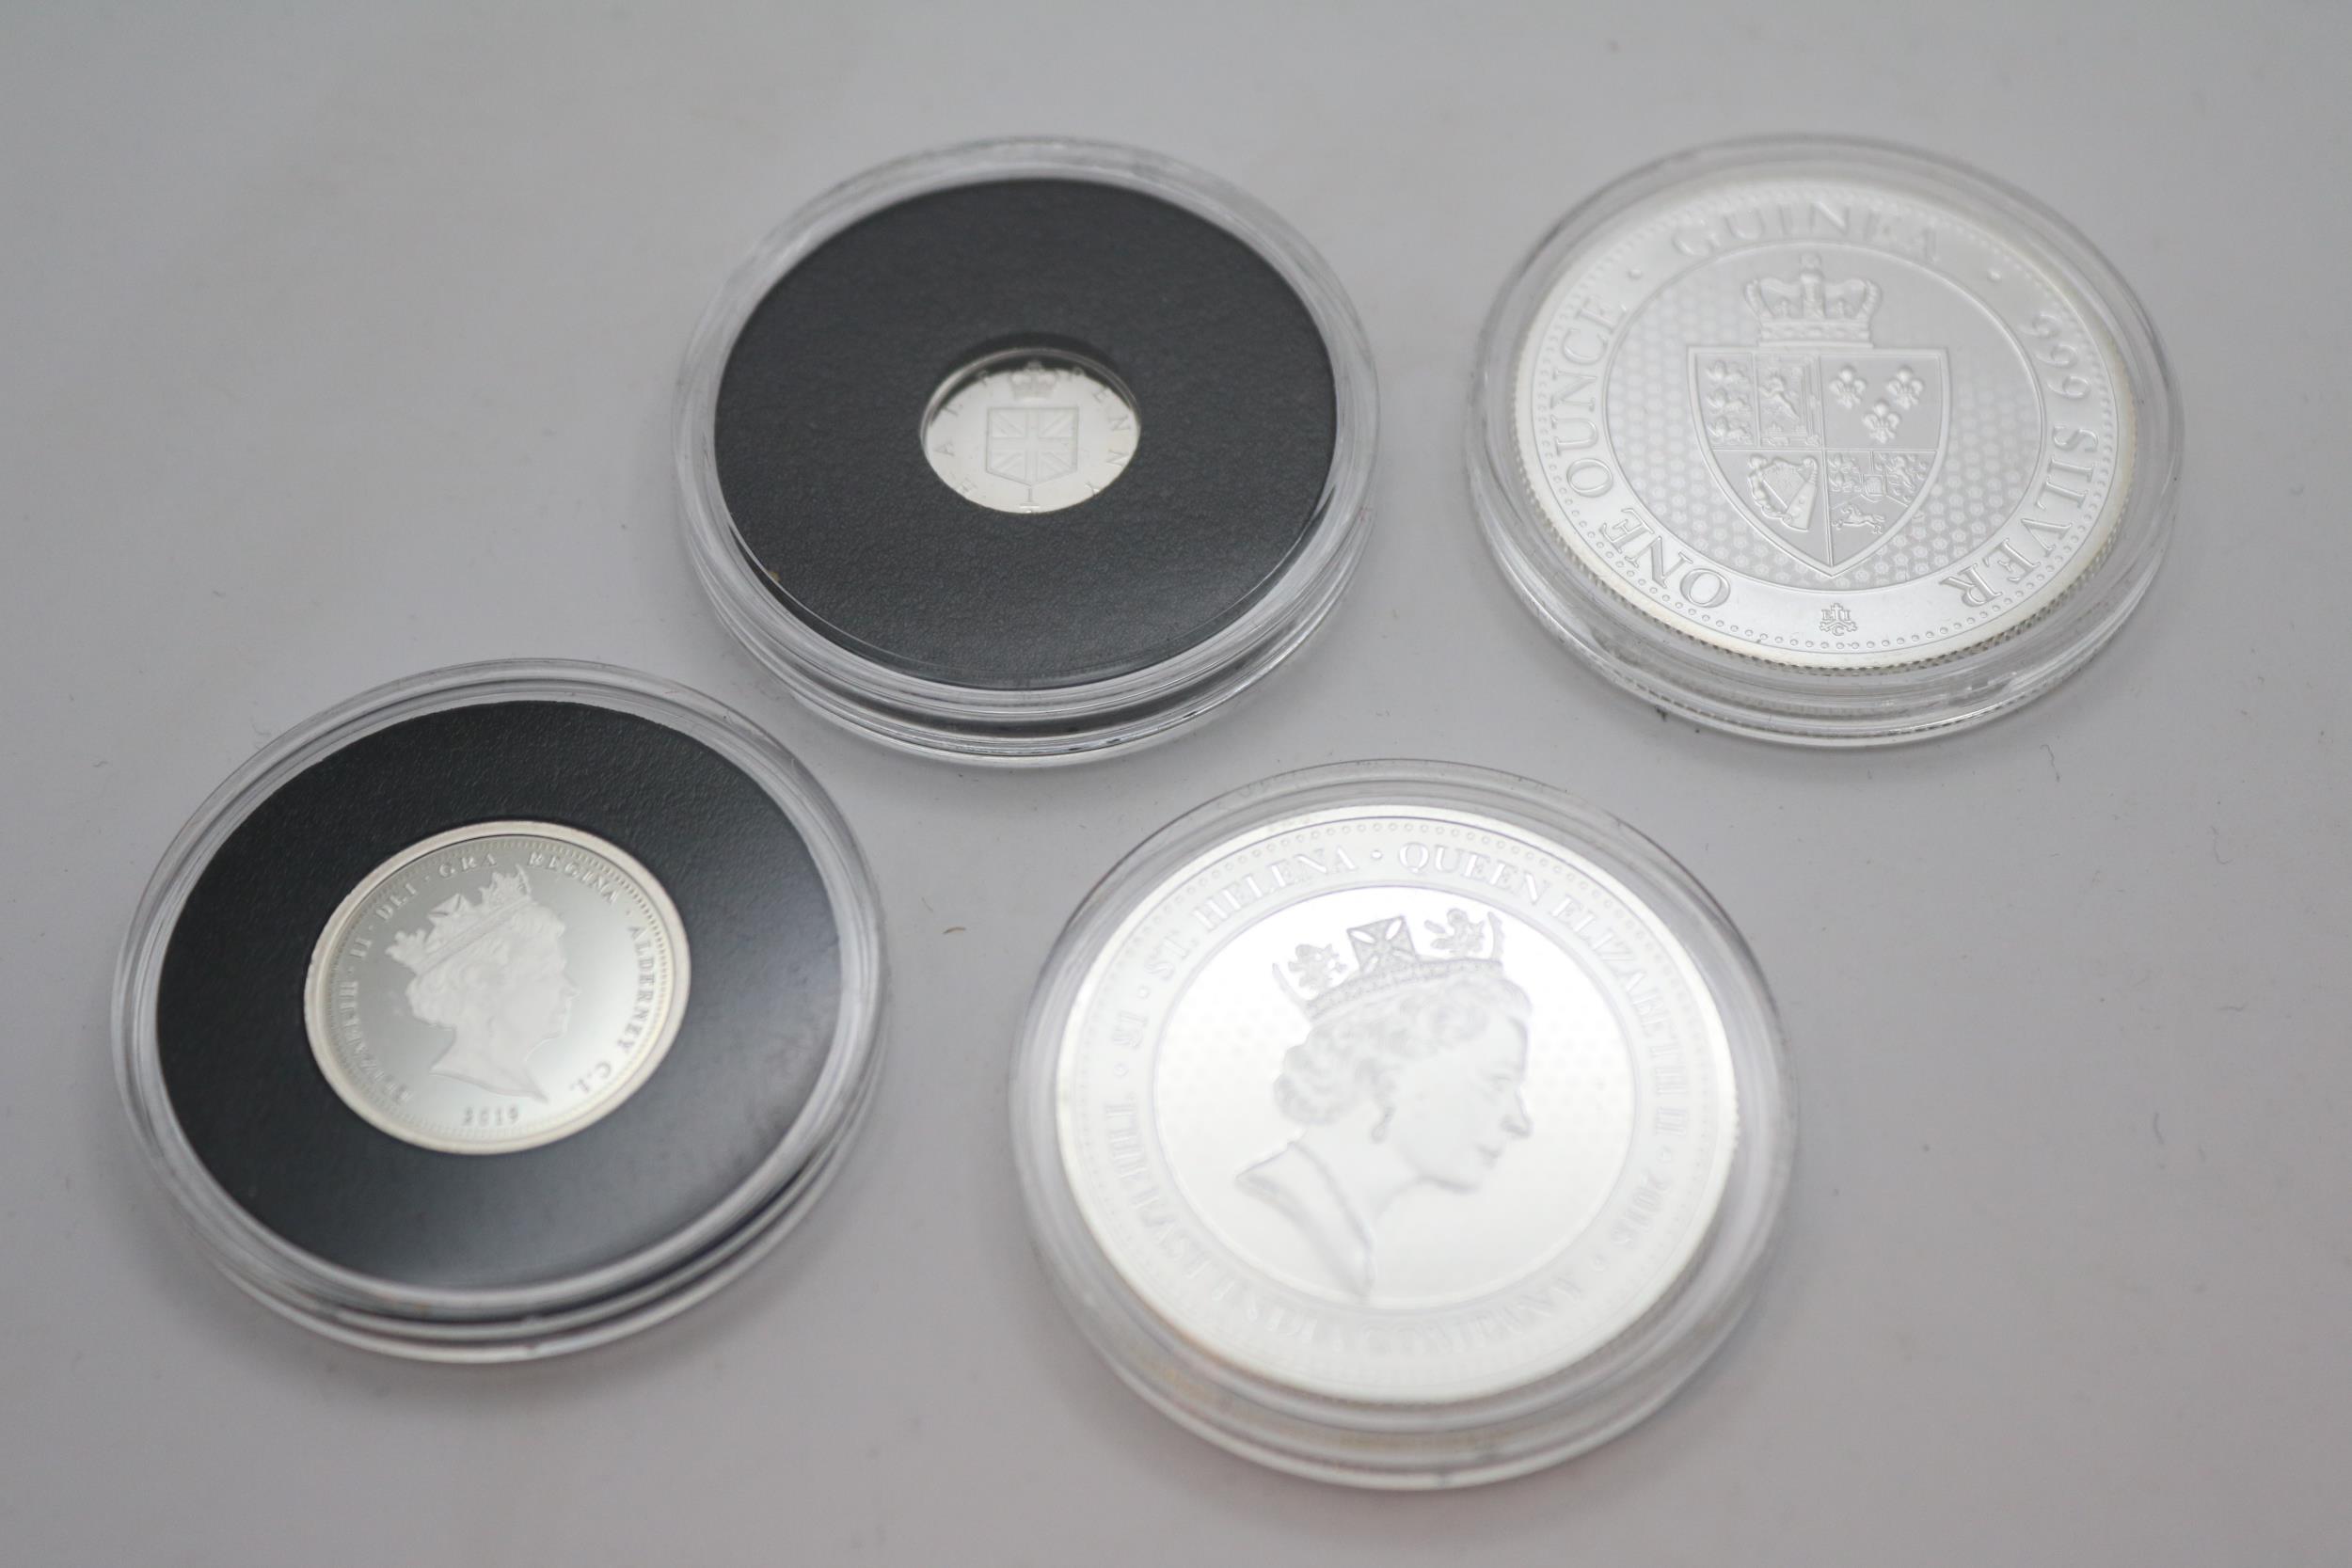 Collection of 4 Silver Proof Coins inc. 2018 St Helena Spade Guinea 1oz with certificate